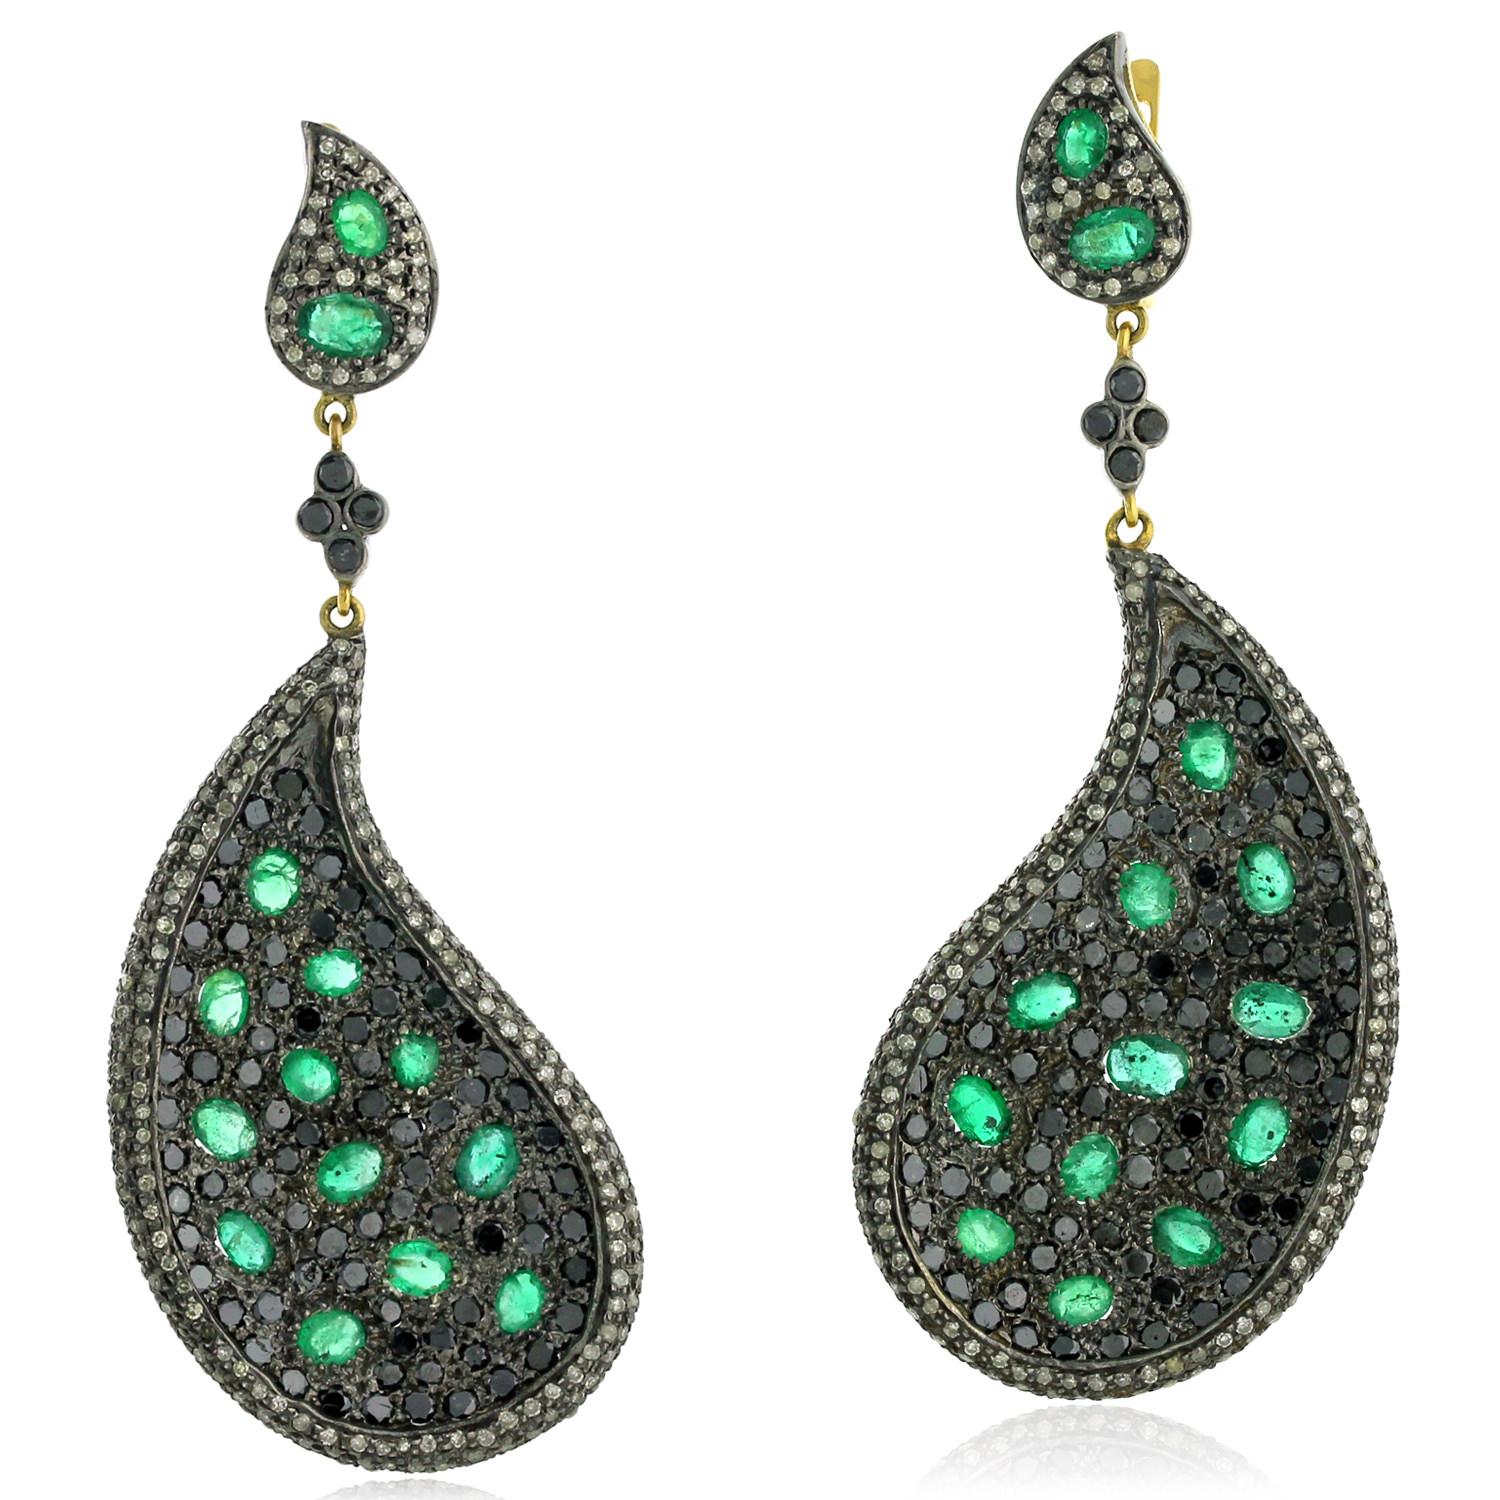 Feather Shaped Earrings With Emerald & Pave Diamonds Made in 14k Gold & Silver In New Condition For Sale In New York, NY